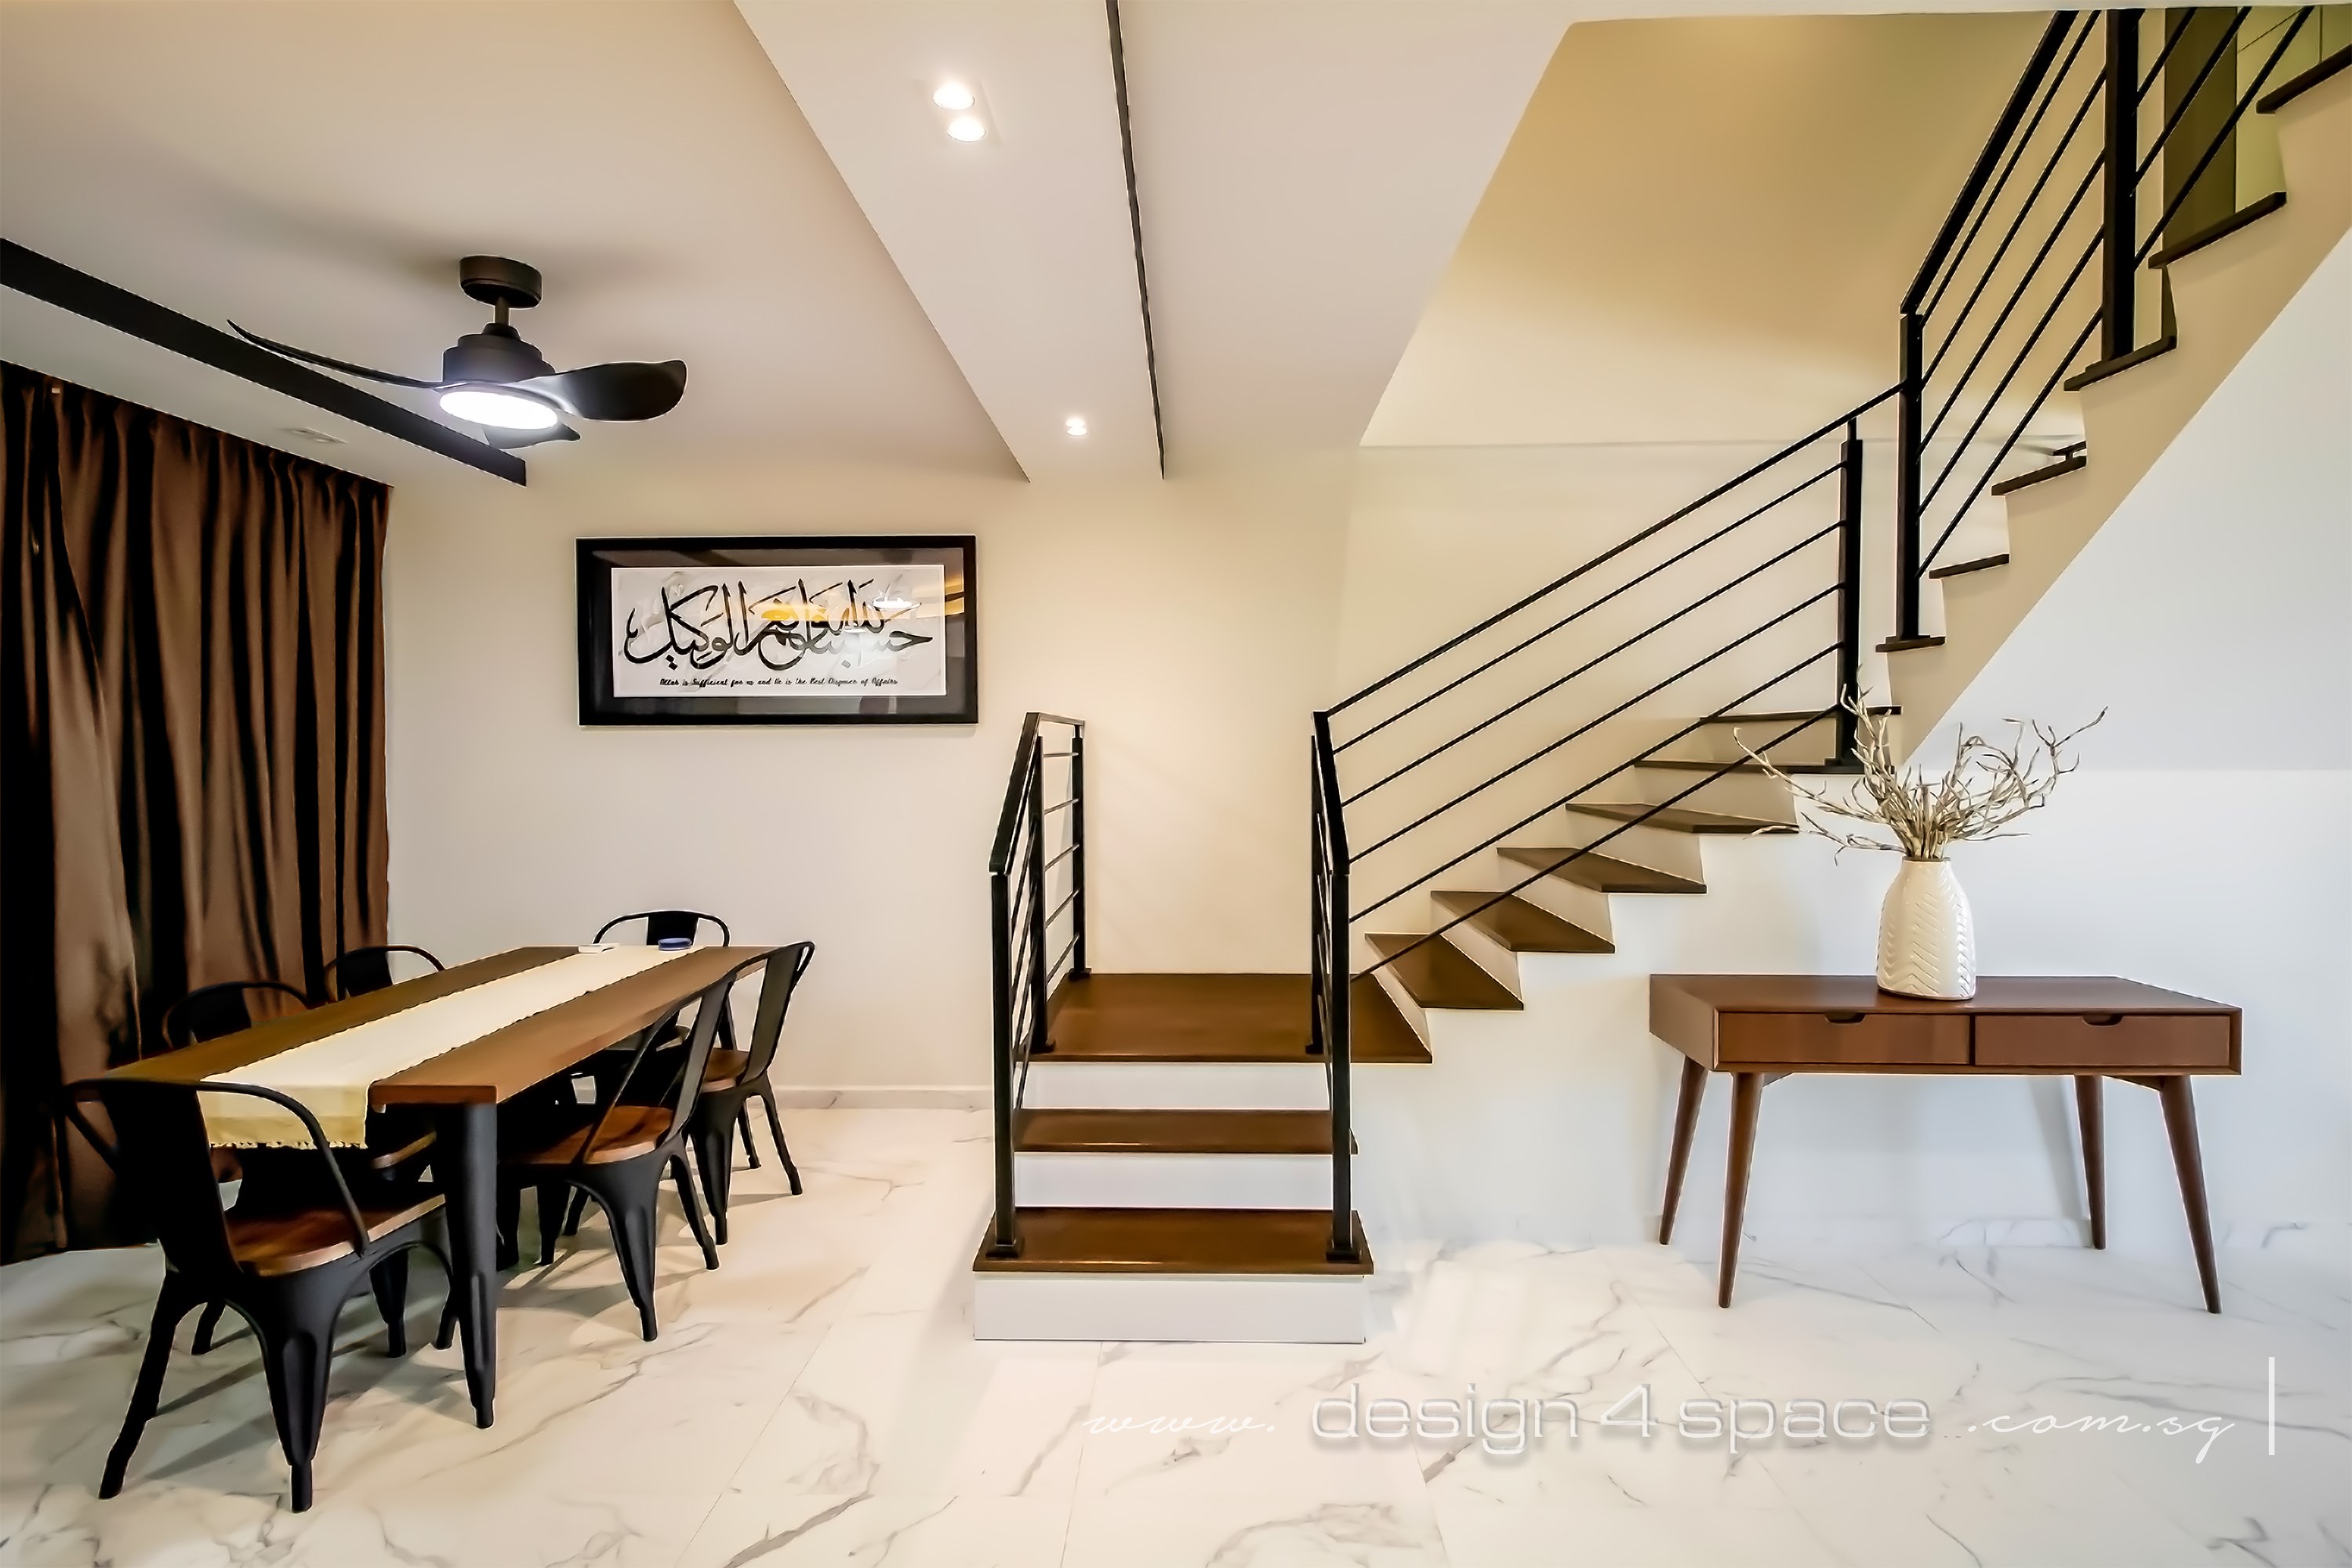 Contemporary, Eclectic, Others Design - Dining Room - Others - Design by Design 4 Space Pte Ltd